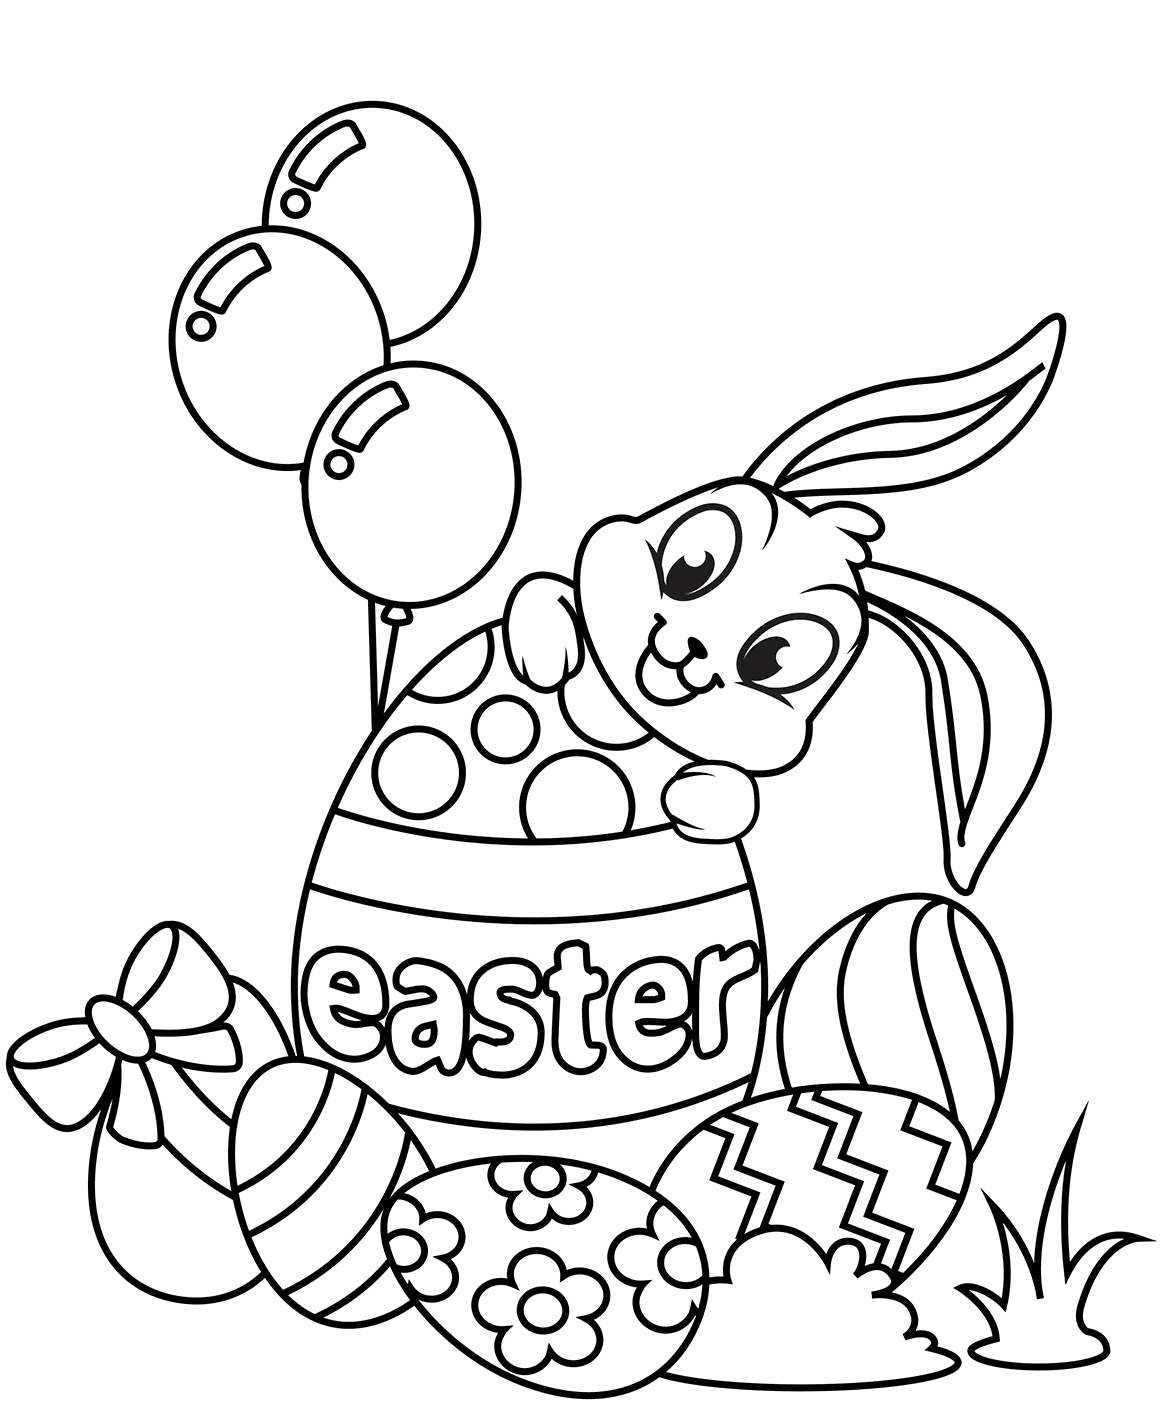 Free Easter Bunny Printables